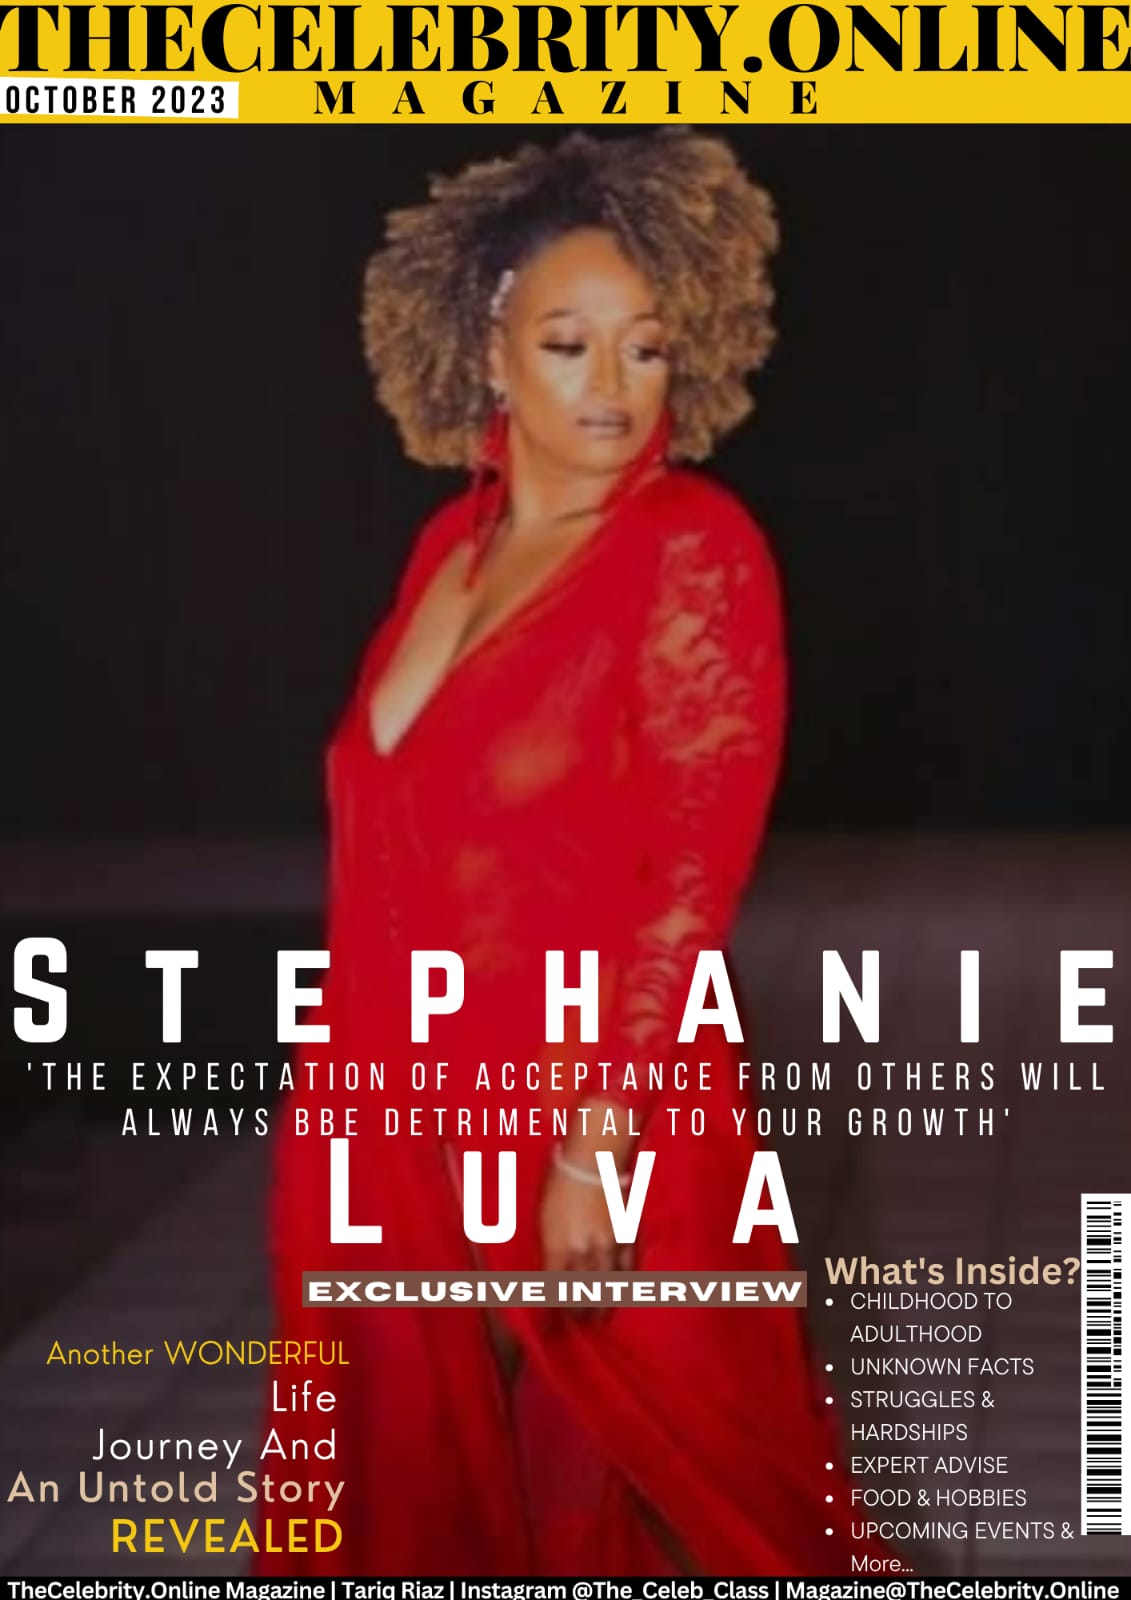 Stephanie Luva Exclusive Interview – ‘The Expectation Of Acceptance From Others Will Always Bbe Detrimental To Your Growth’